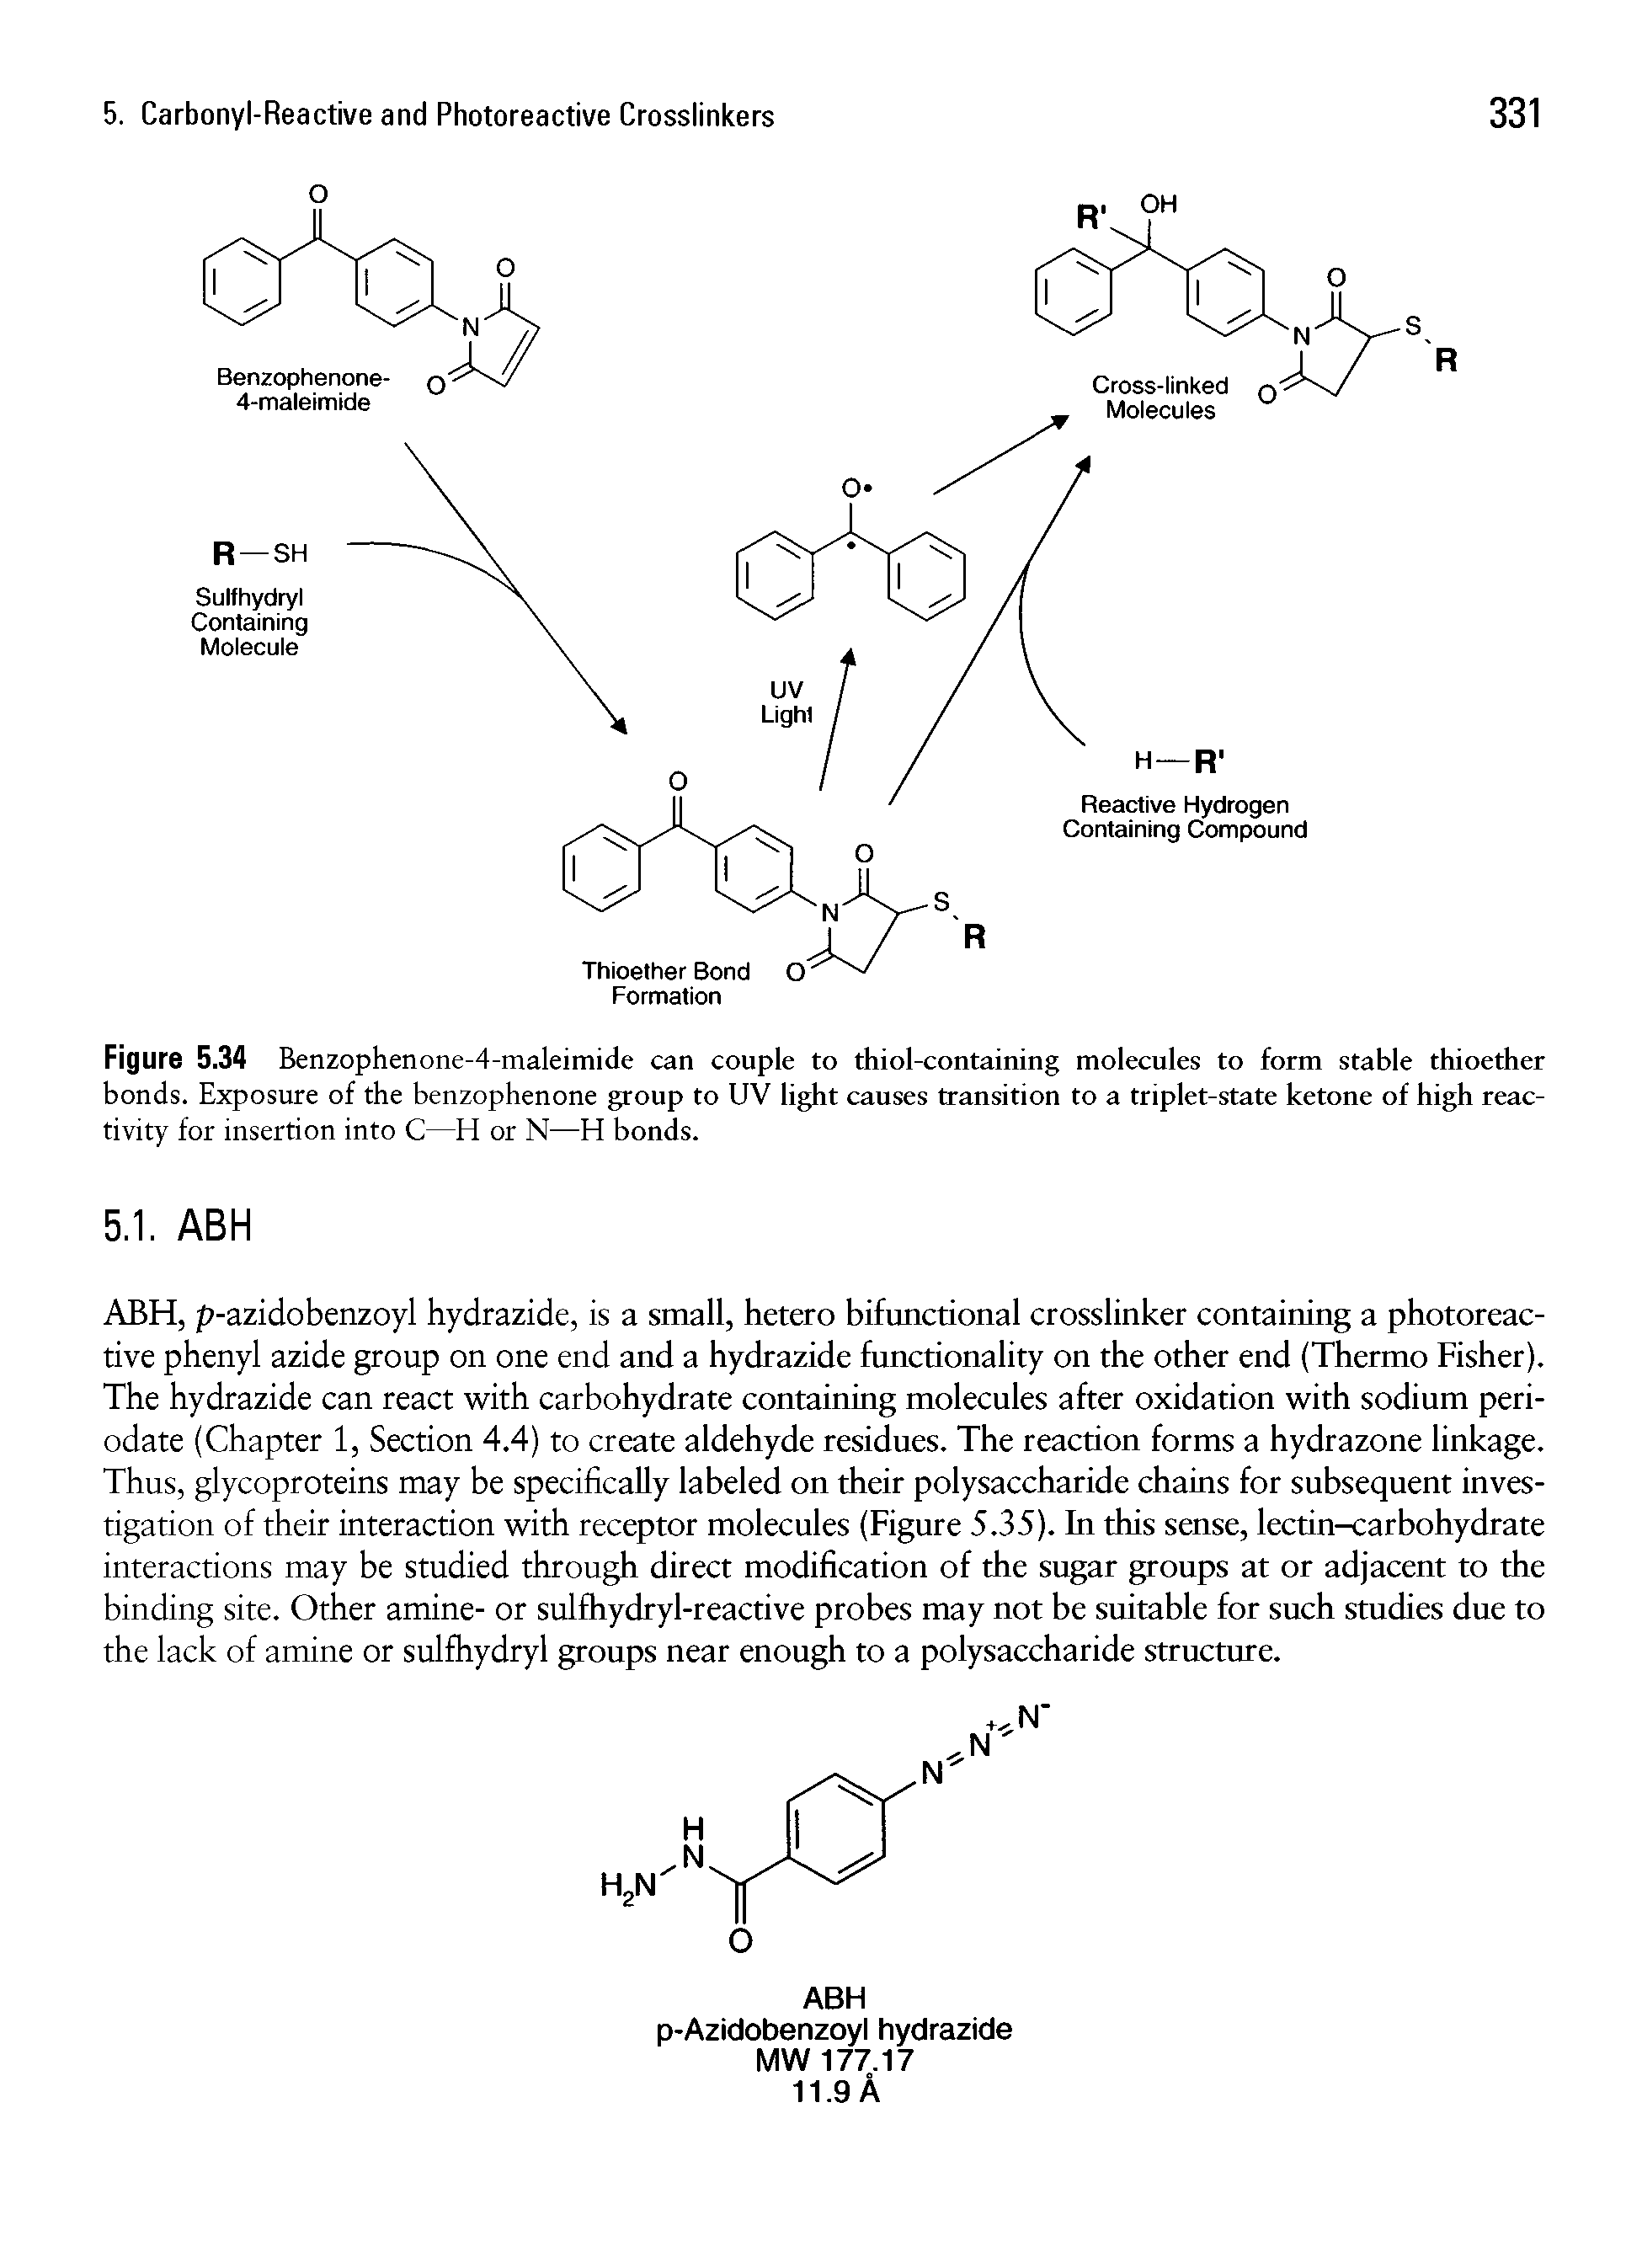 Figure 5.34 Benzophenone-4-maleimide can couple to thiol-containing molecules to form stable thioether bonds. Exposure of the benzophenone group to UV light causes transition to a triplet-state ketone of high reactivity for insertion into C—H or N—H bonds.